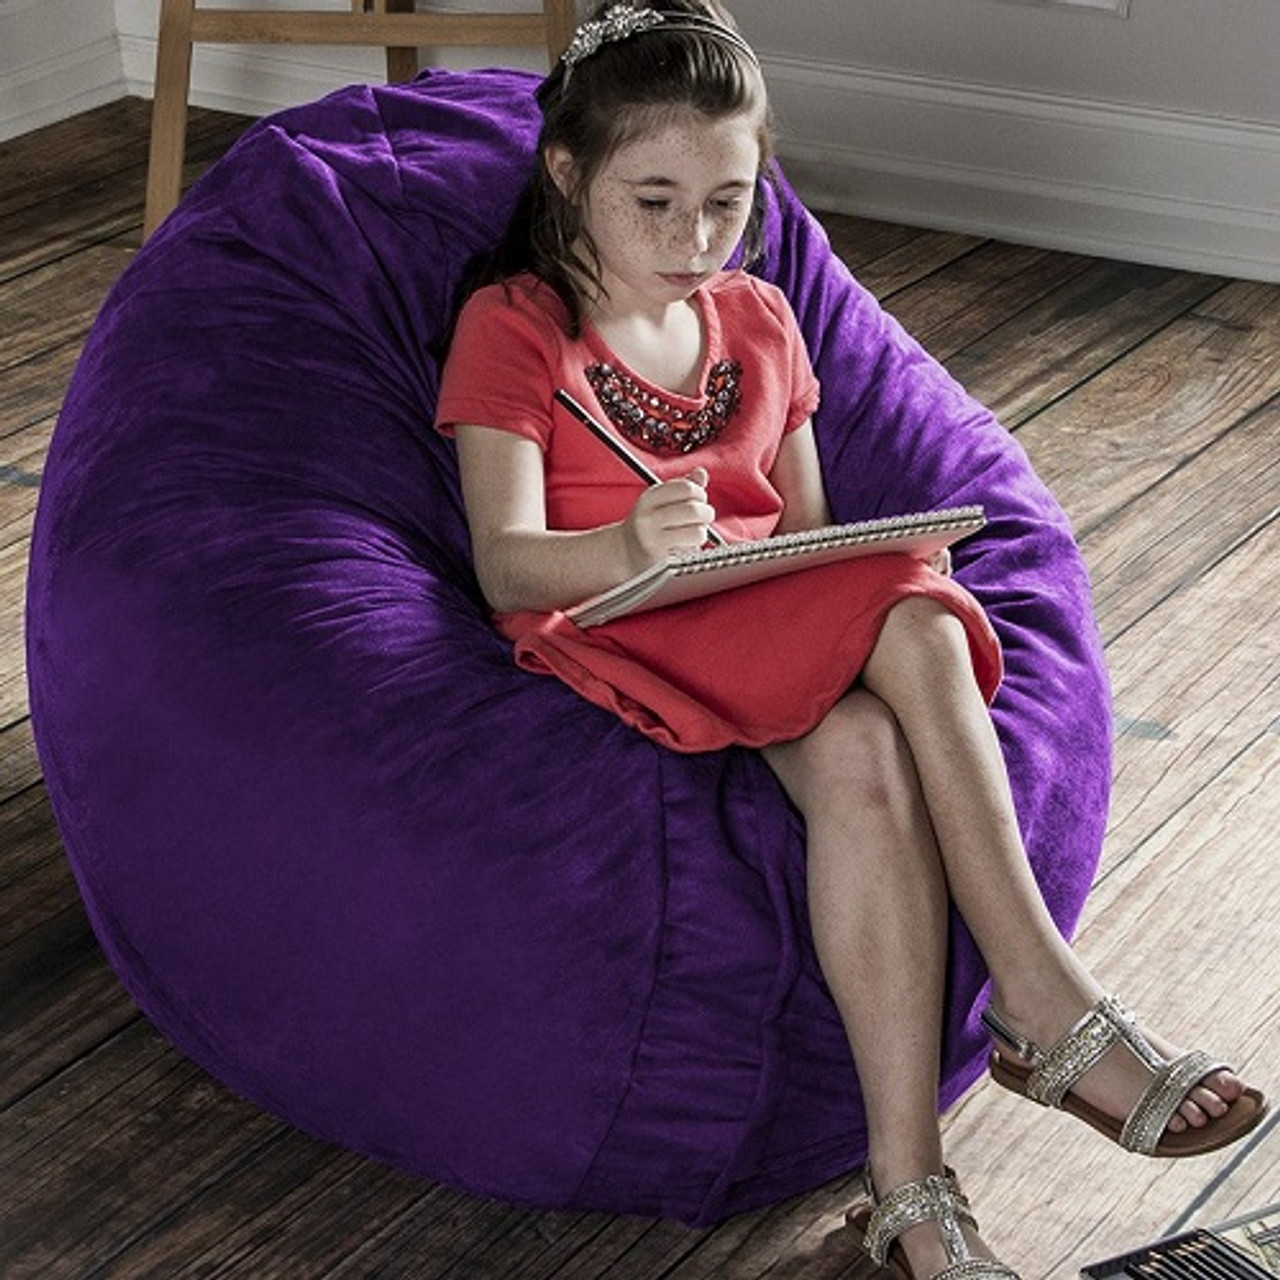 Bean Bag Chairs For Autism And Special Needs